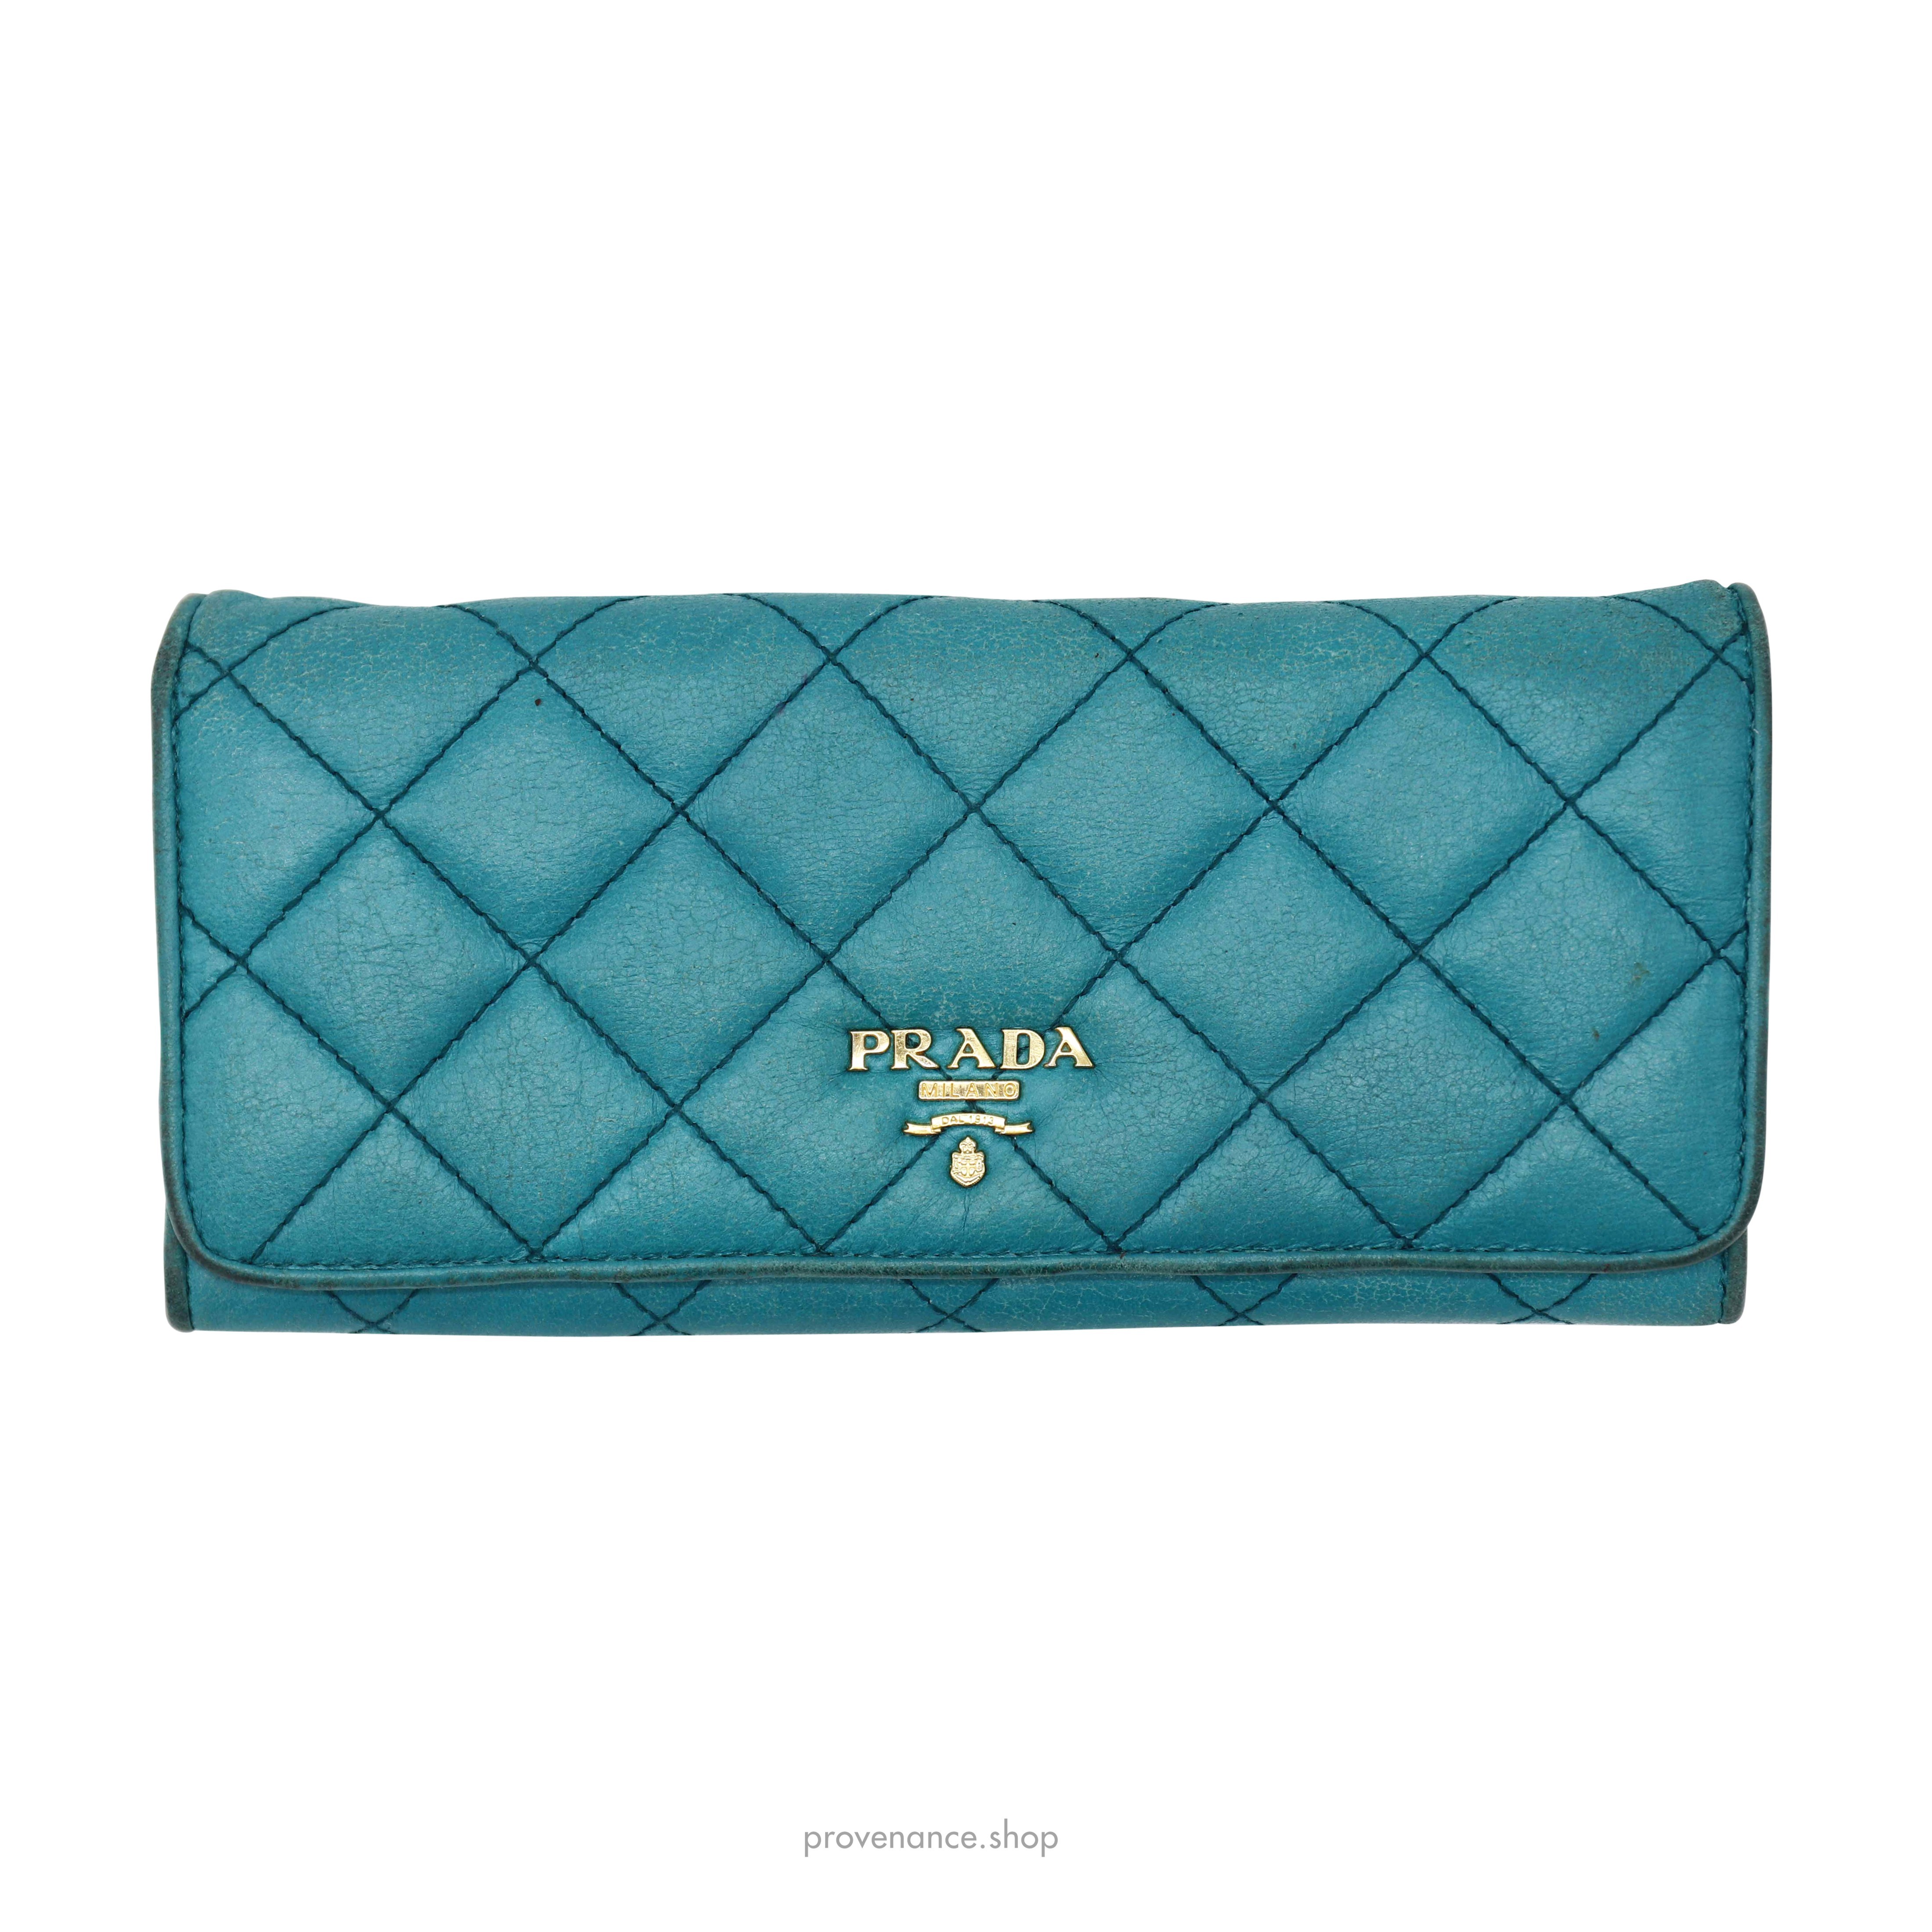 Prada Long Wallet - Quilted Blue Calfskin Leather - 1